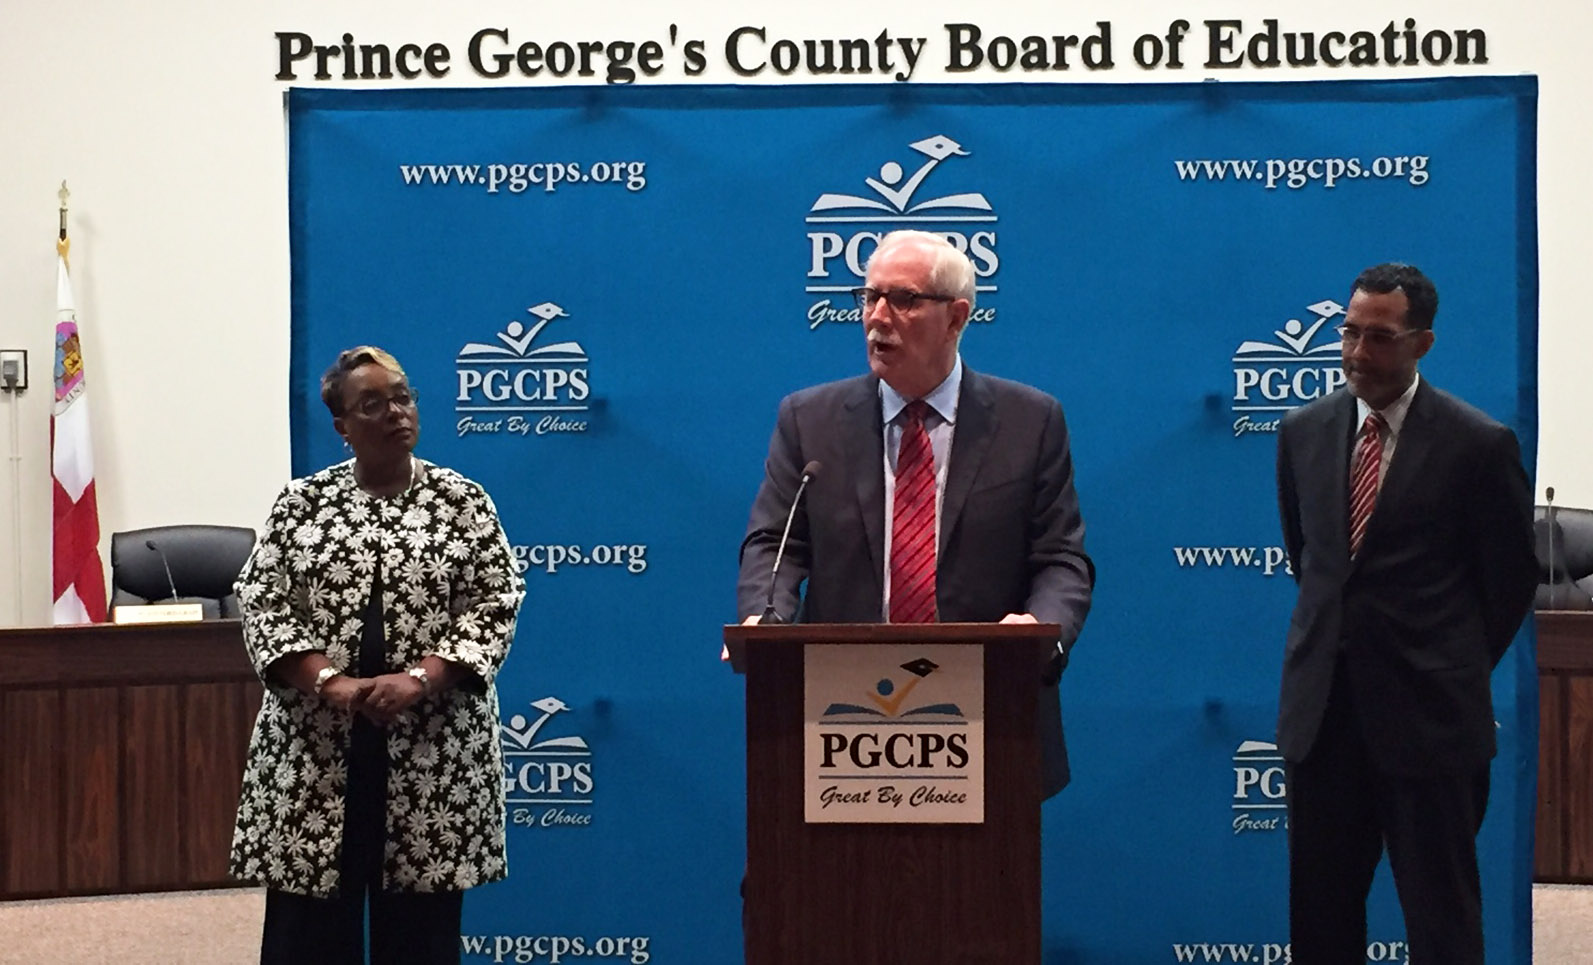 Prince George's County Public Schools chief Kevin Maxwell speaks about the final report from a student safety task force on Tuesday, May 31, 2016. He created the task force in the wake of an arrest of a school aide, who has been charged with sexually exploiting and abusing the young students he worked with. The report details five areas requiring changes including reporting, training and screening, oversight, accountability and curriculum and counseling. (WTOP/Kate Ryan)